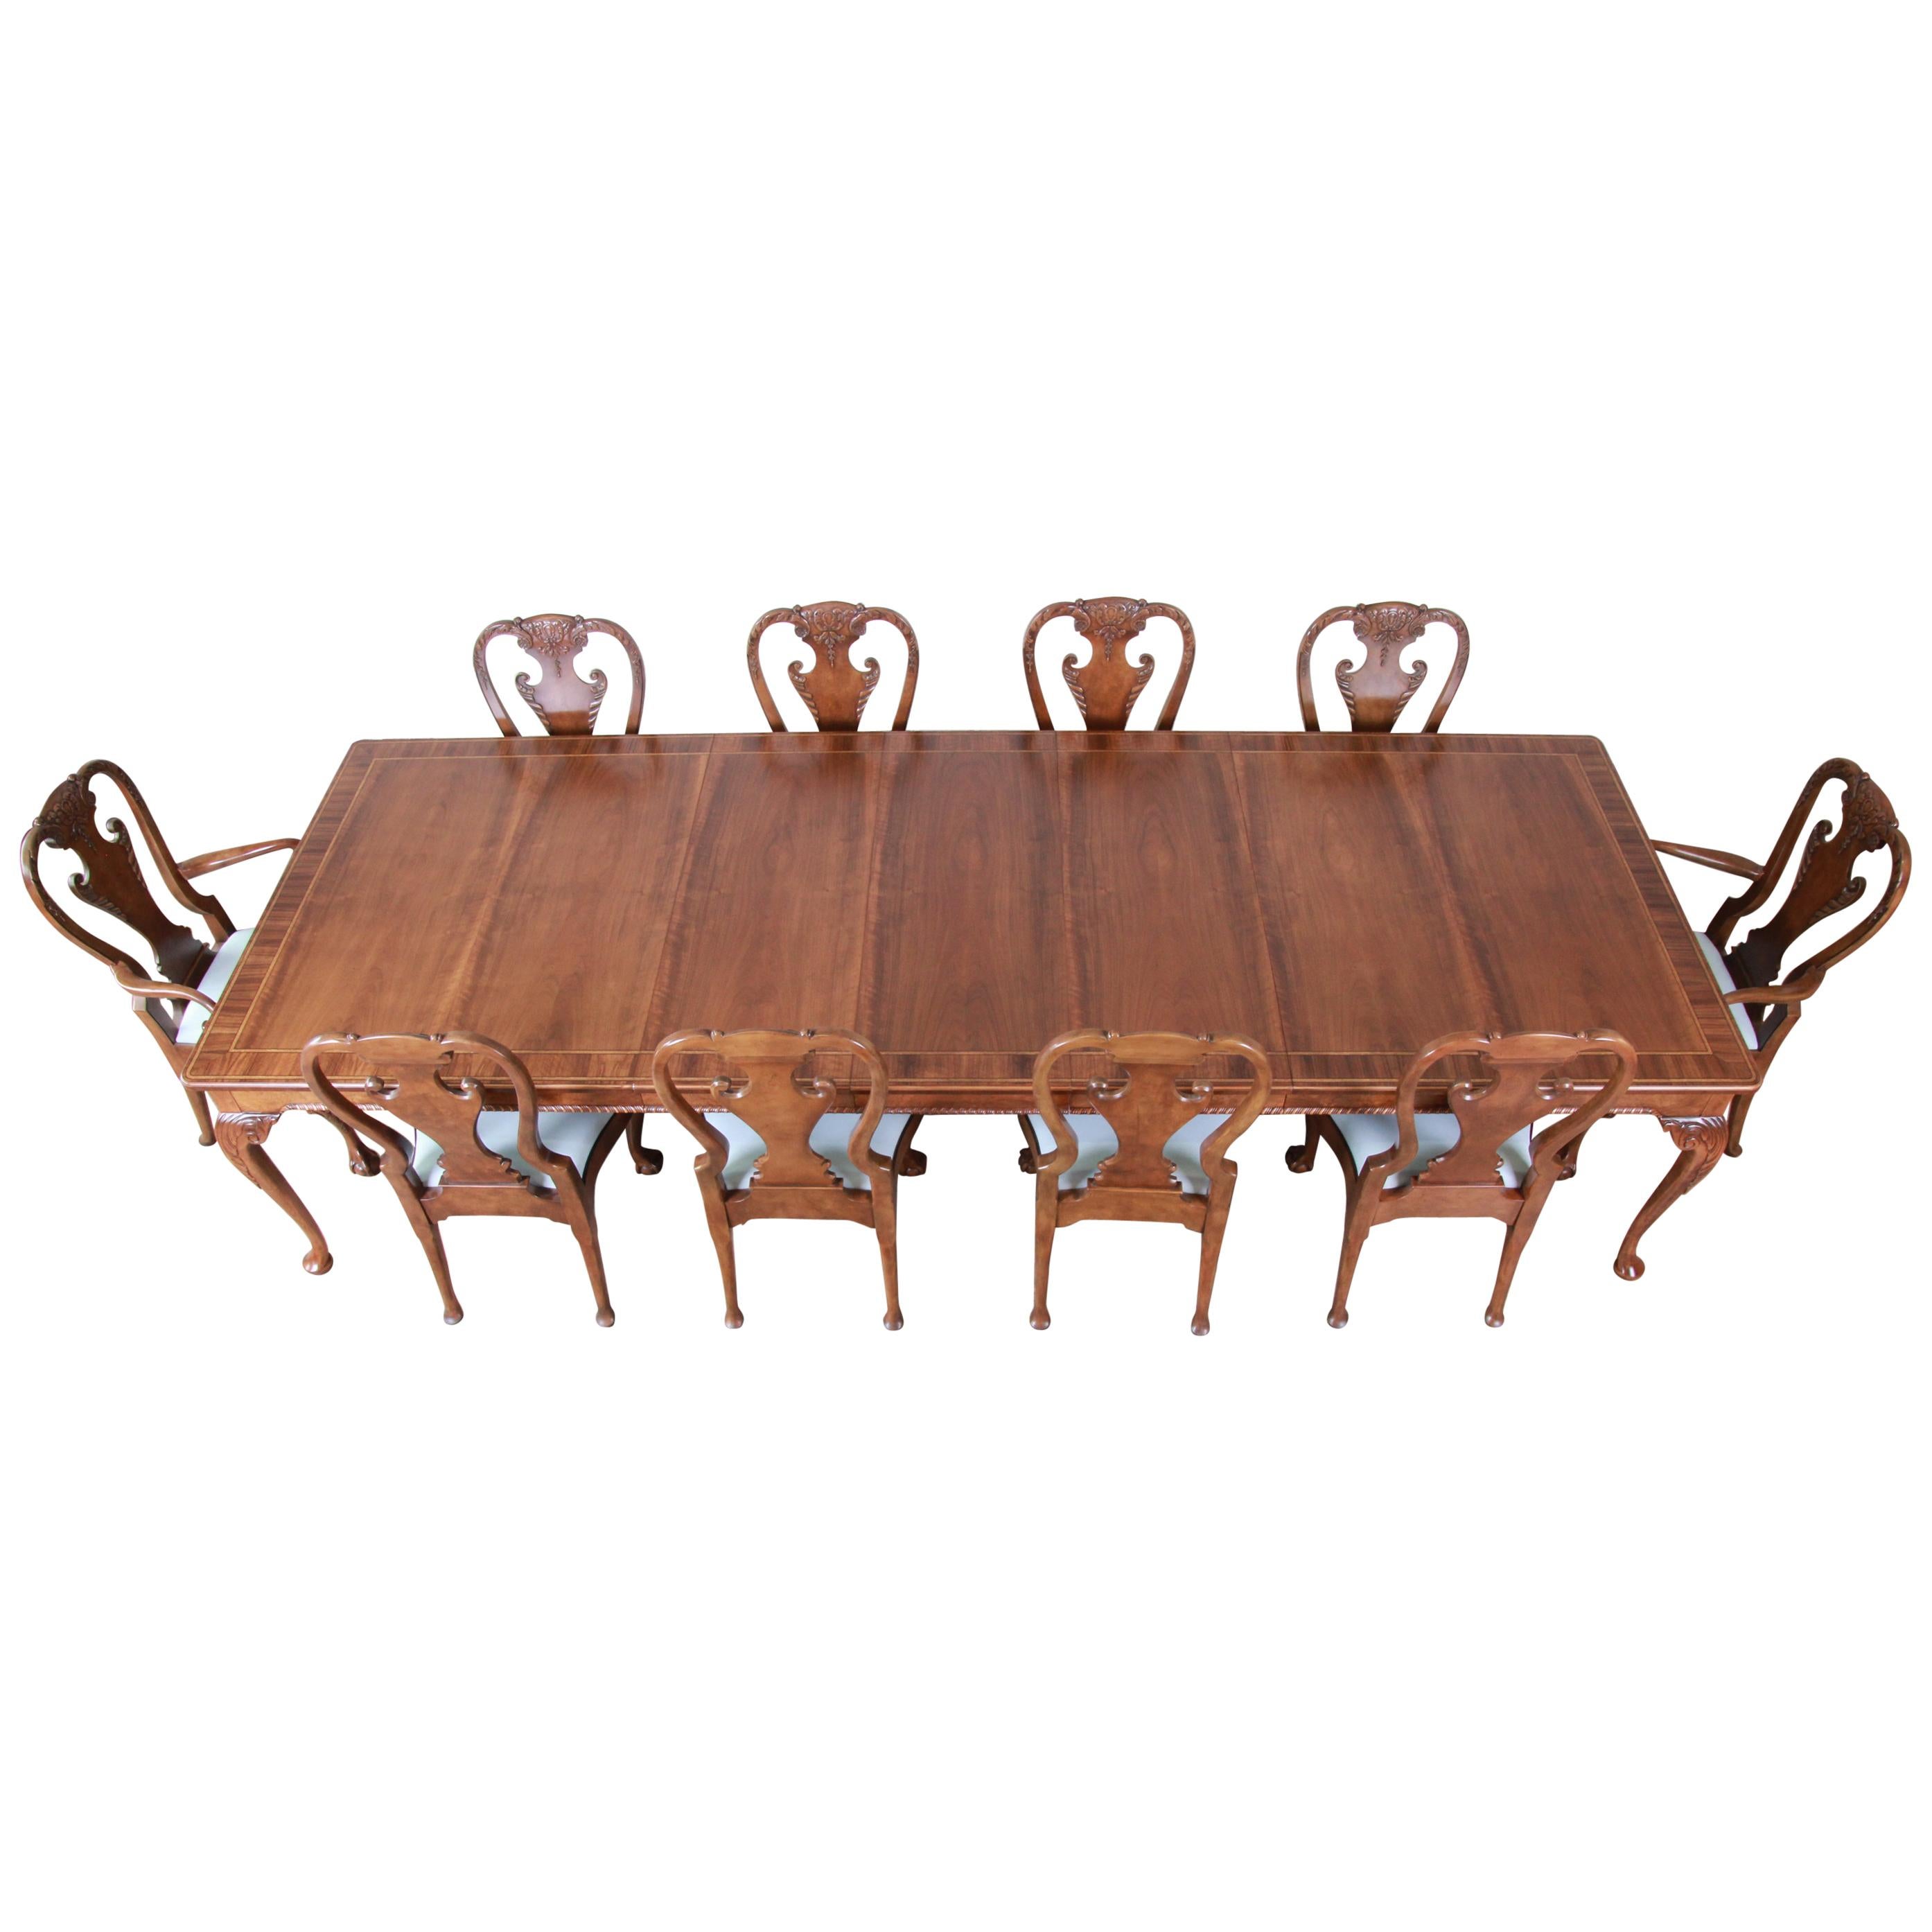 Baker Furniture Stately Homes Collection Chippendale Walnut Dining Set, Restored